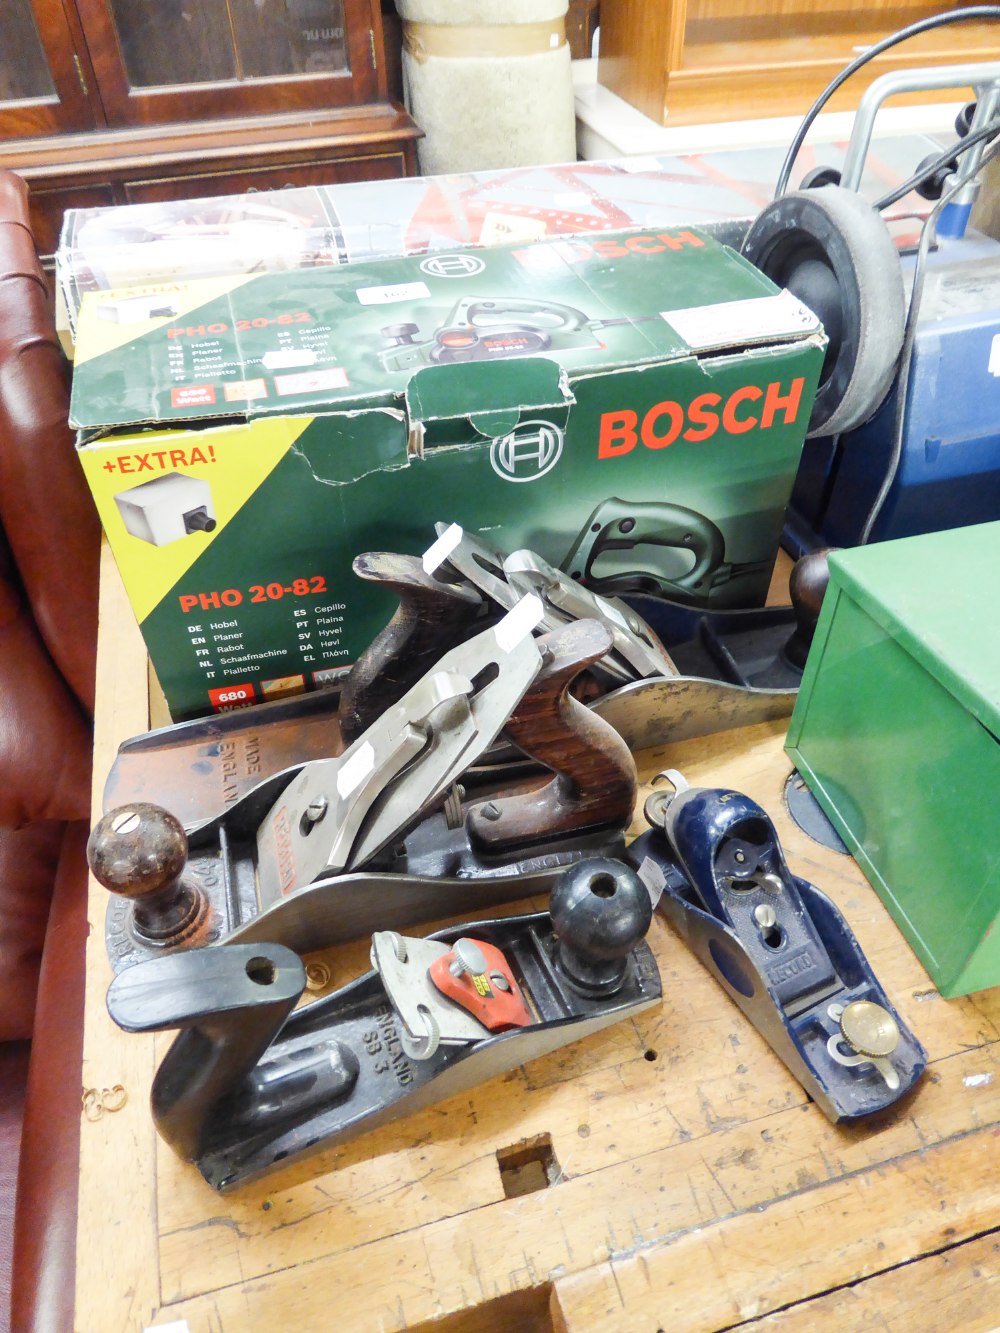 A BOSCH ELECTRIC WOOD PLANE, 4 MODERN HAND WOOD PLANES OF VARYING SIZES